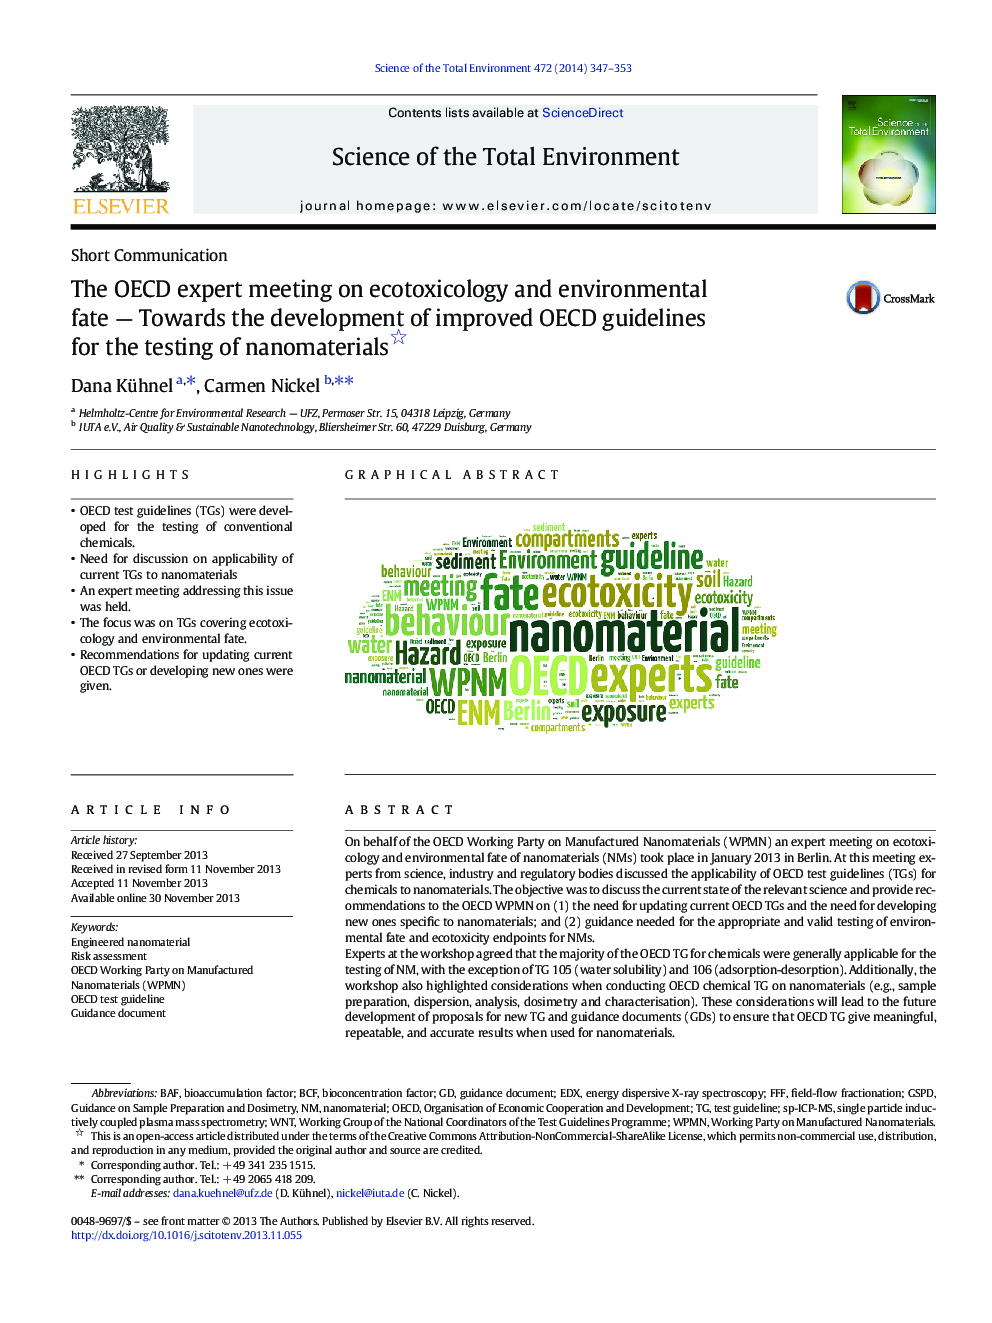 The OECD expert meeting on ecotoxicology and environmental fate - Towards the development of improved OECD guidelines for the testing of nanomaterials